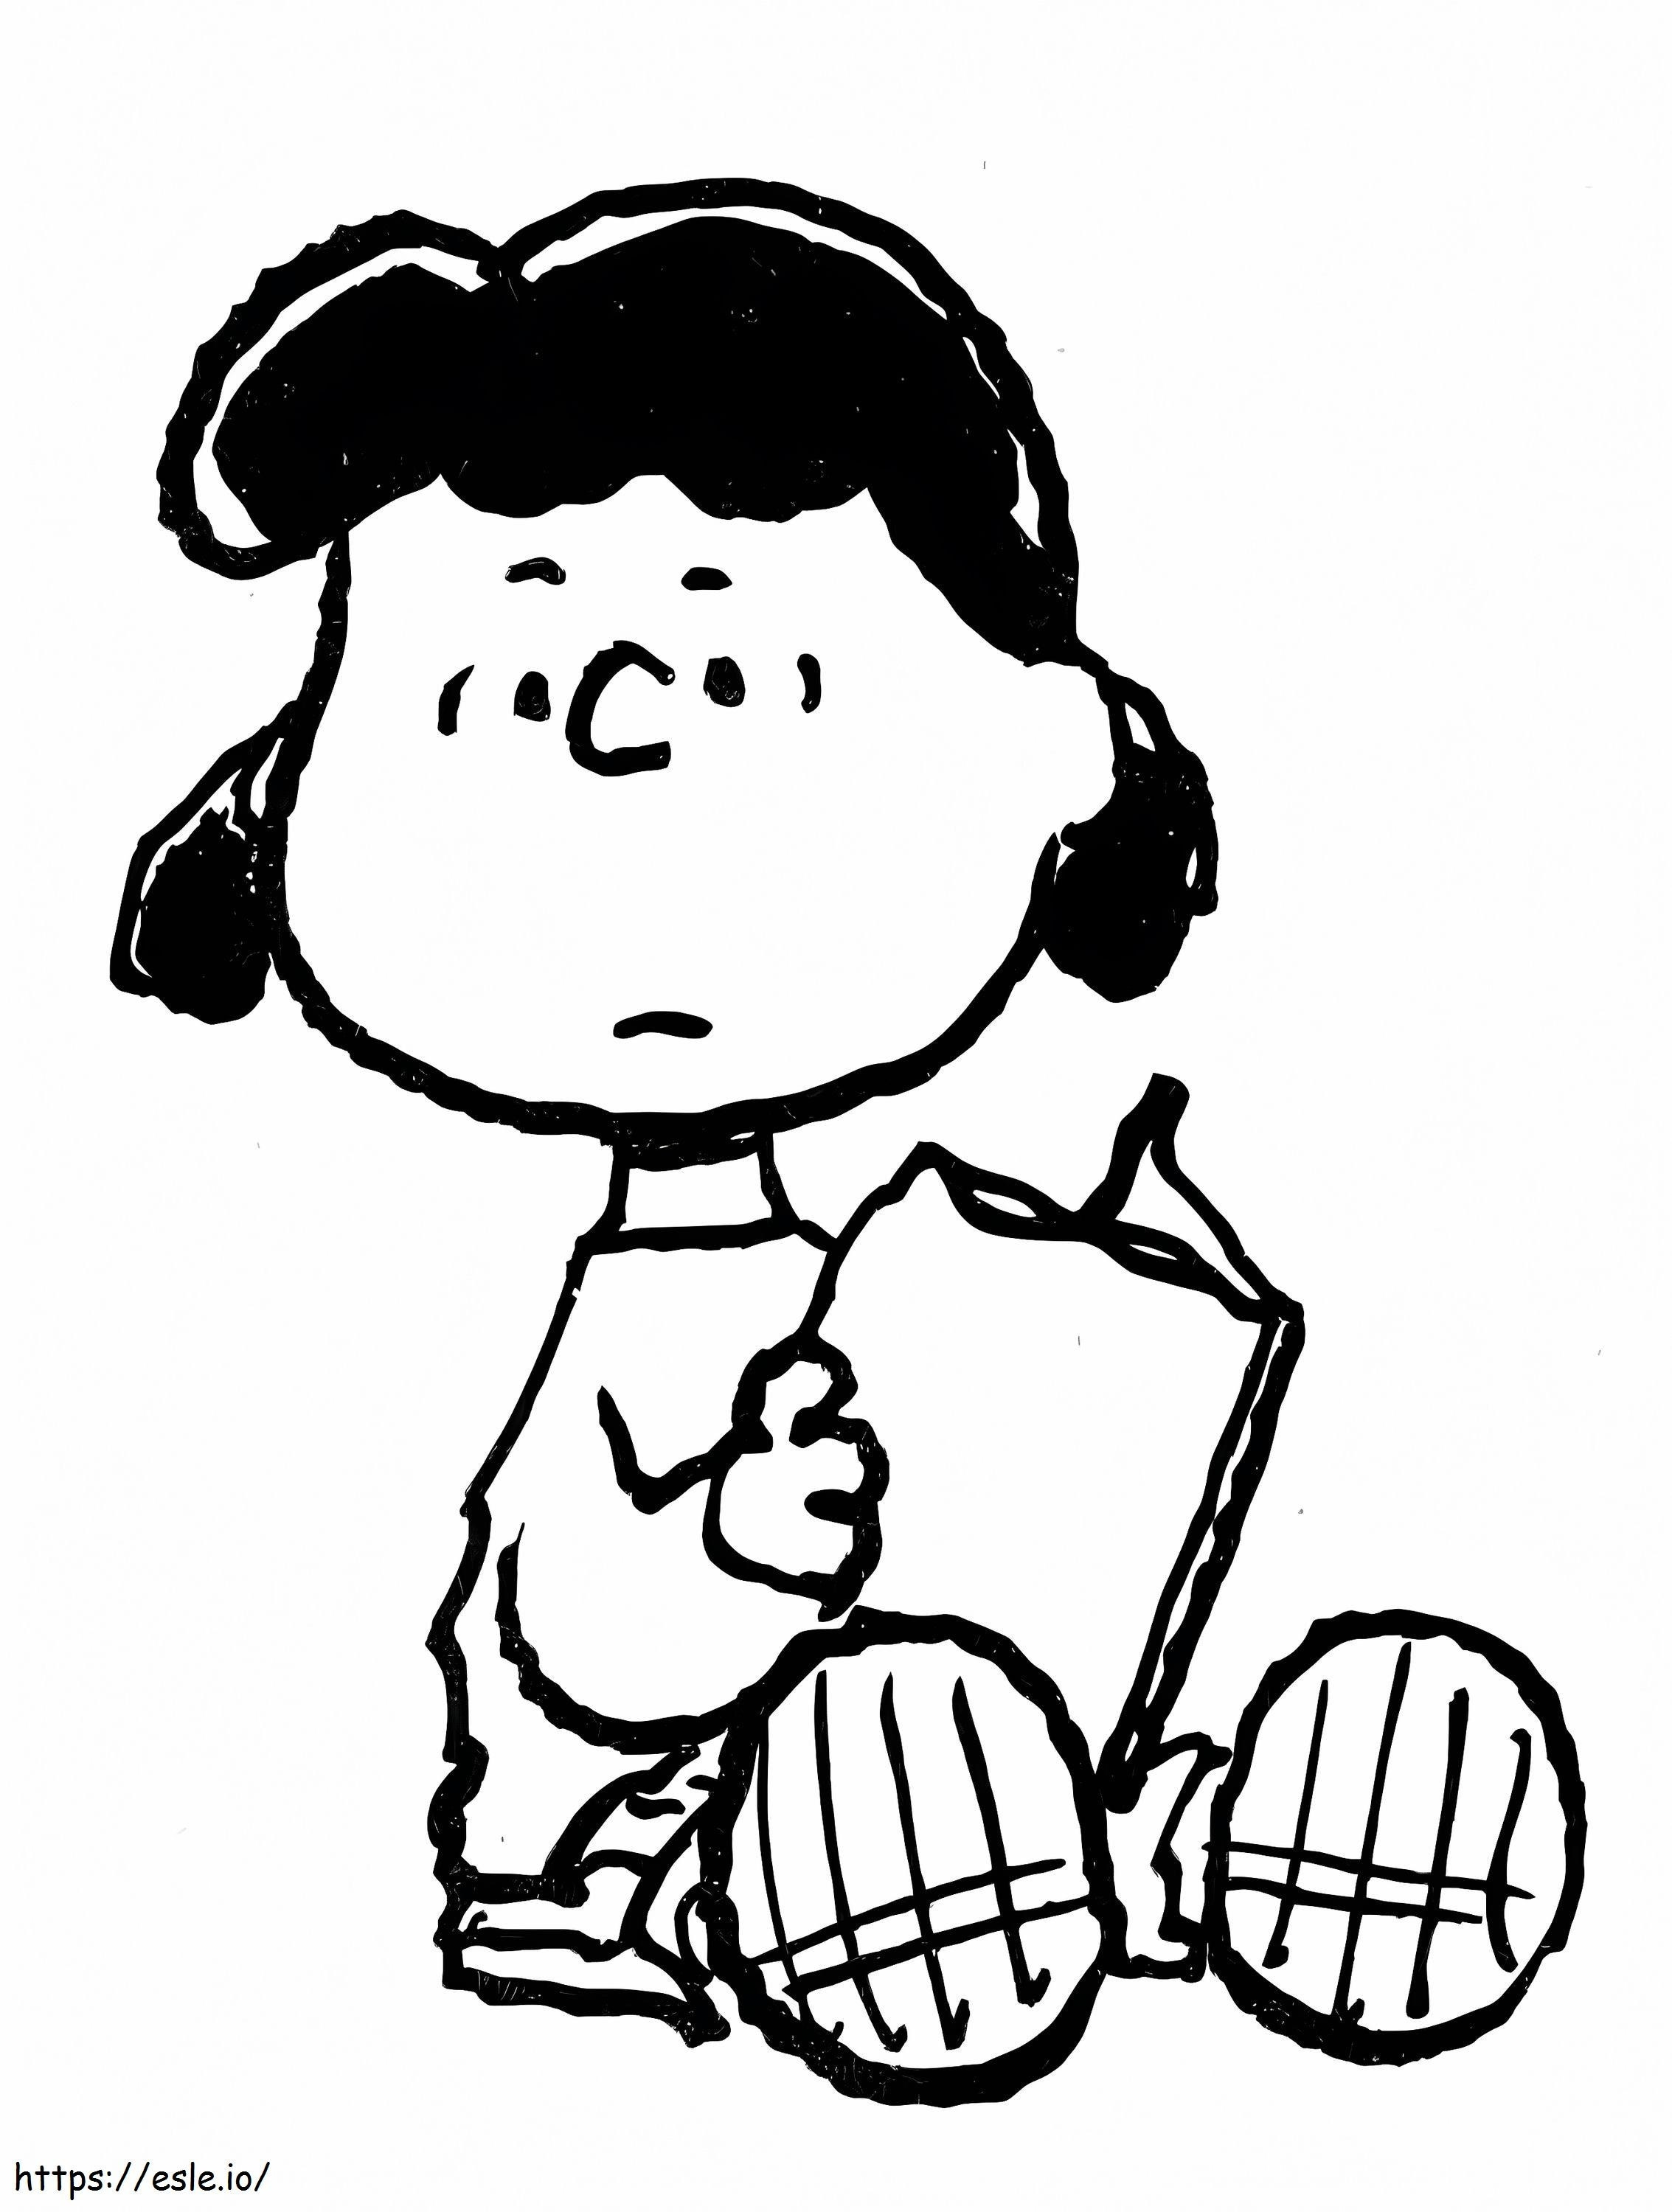 Lucy Van Pelt The Peanuts coloring page